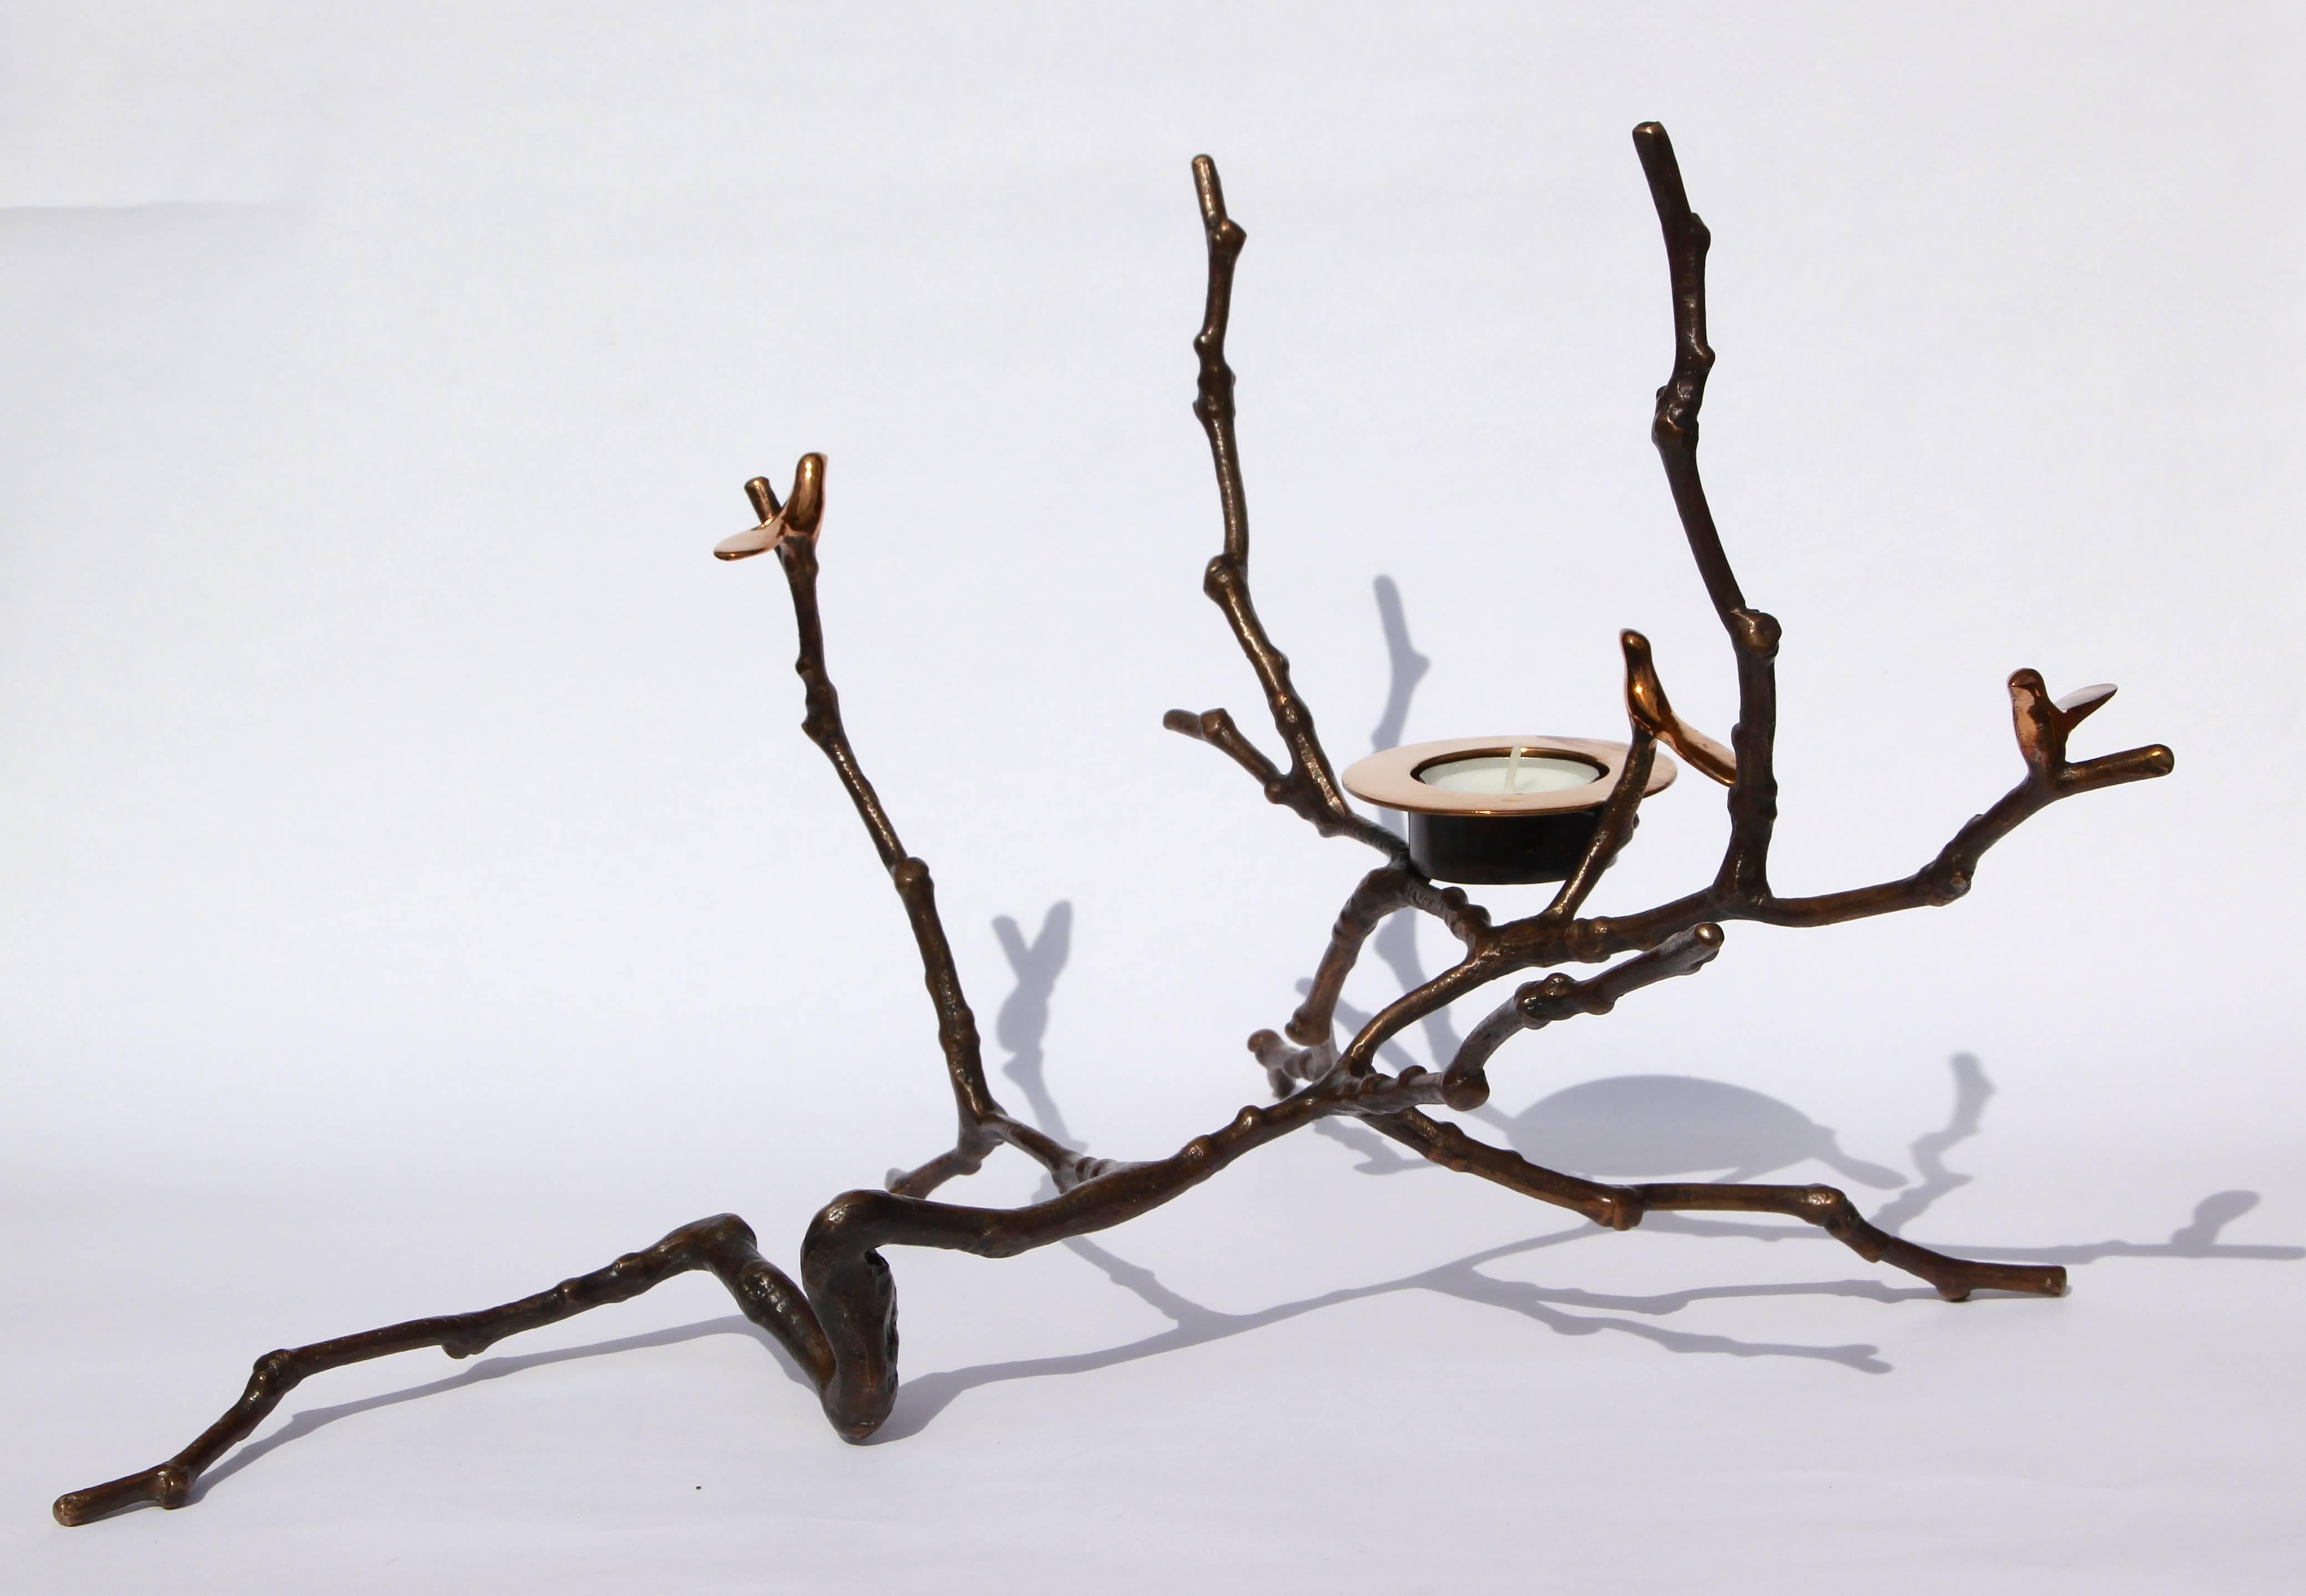 Original, unique and cast in bronze, creating sumptuous and unusual decorative elements for beautiful homes.

Each of these splendid bronze Magnolia Twig T-light holders is handmade individually with incredible detail. Cast using very traditional